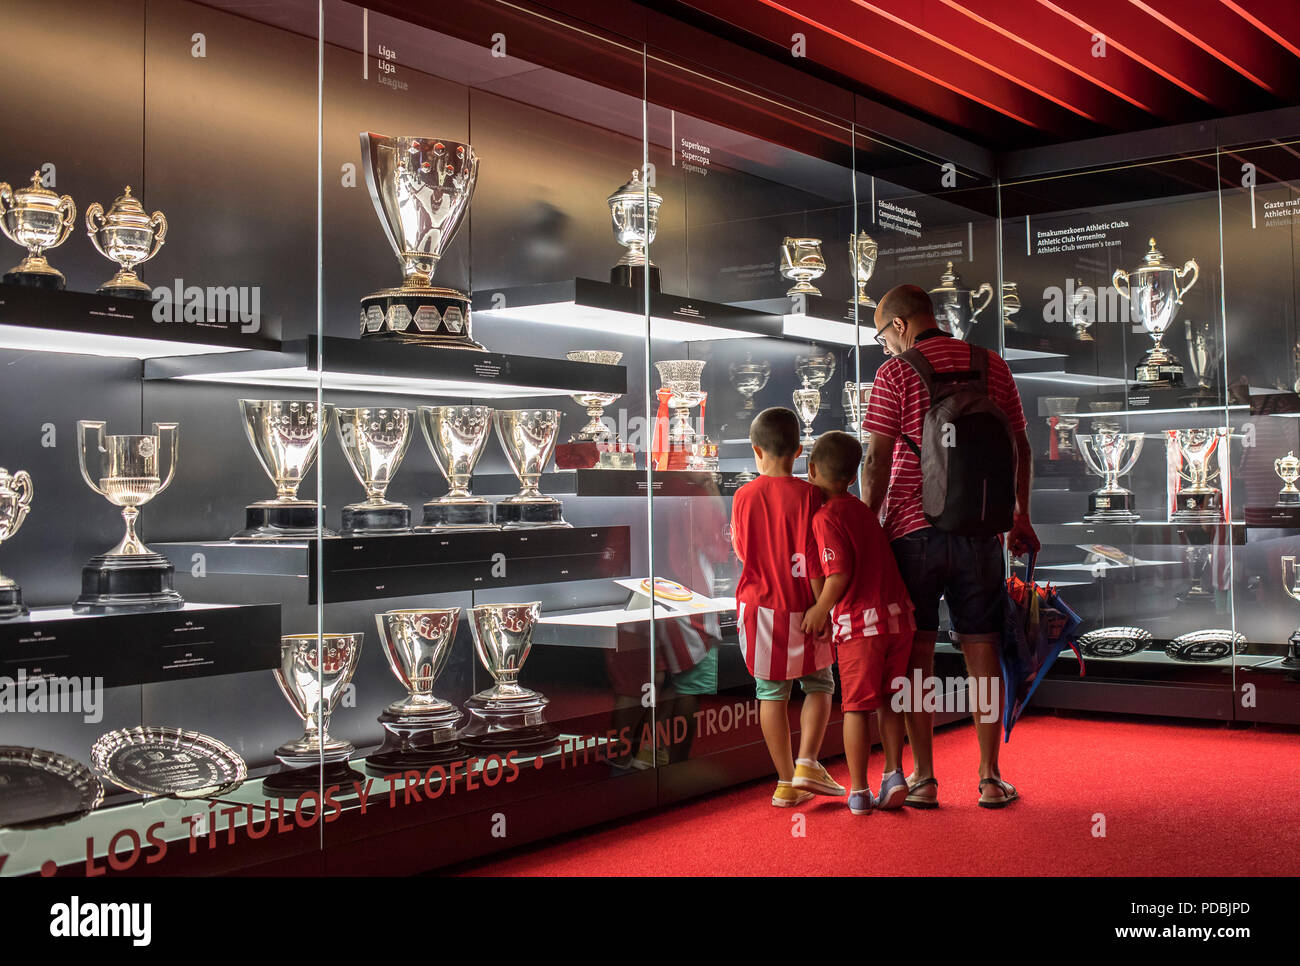 Hall Of Titles And Trophies Athletic Club De Bilbao Museum In San Mames Stadium Home Of Athletic Club De Bilbao Football Team Bilbao Spain Stock Photo Alamy